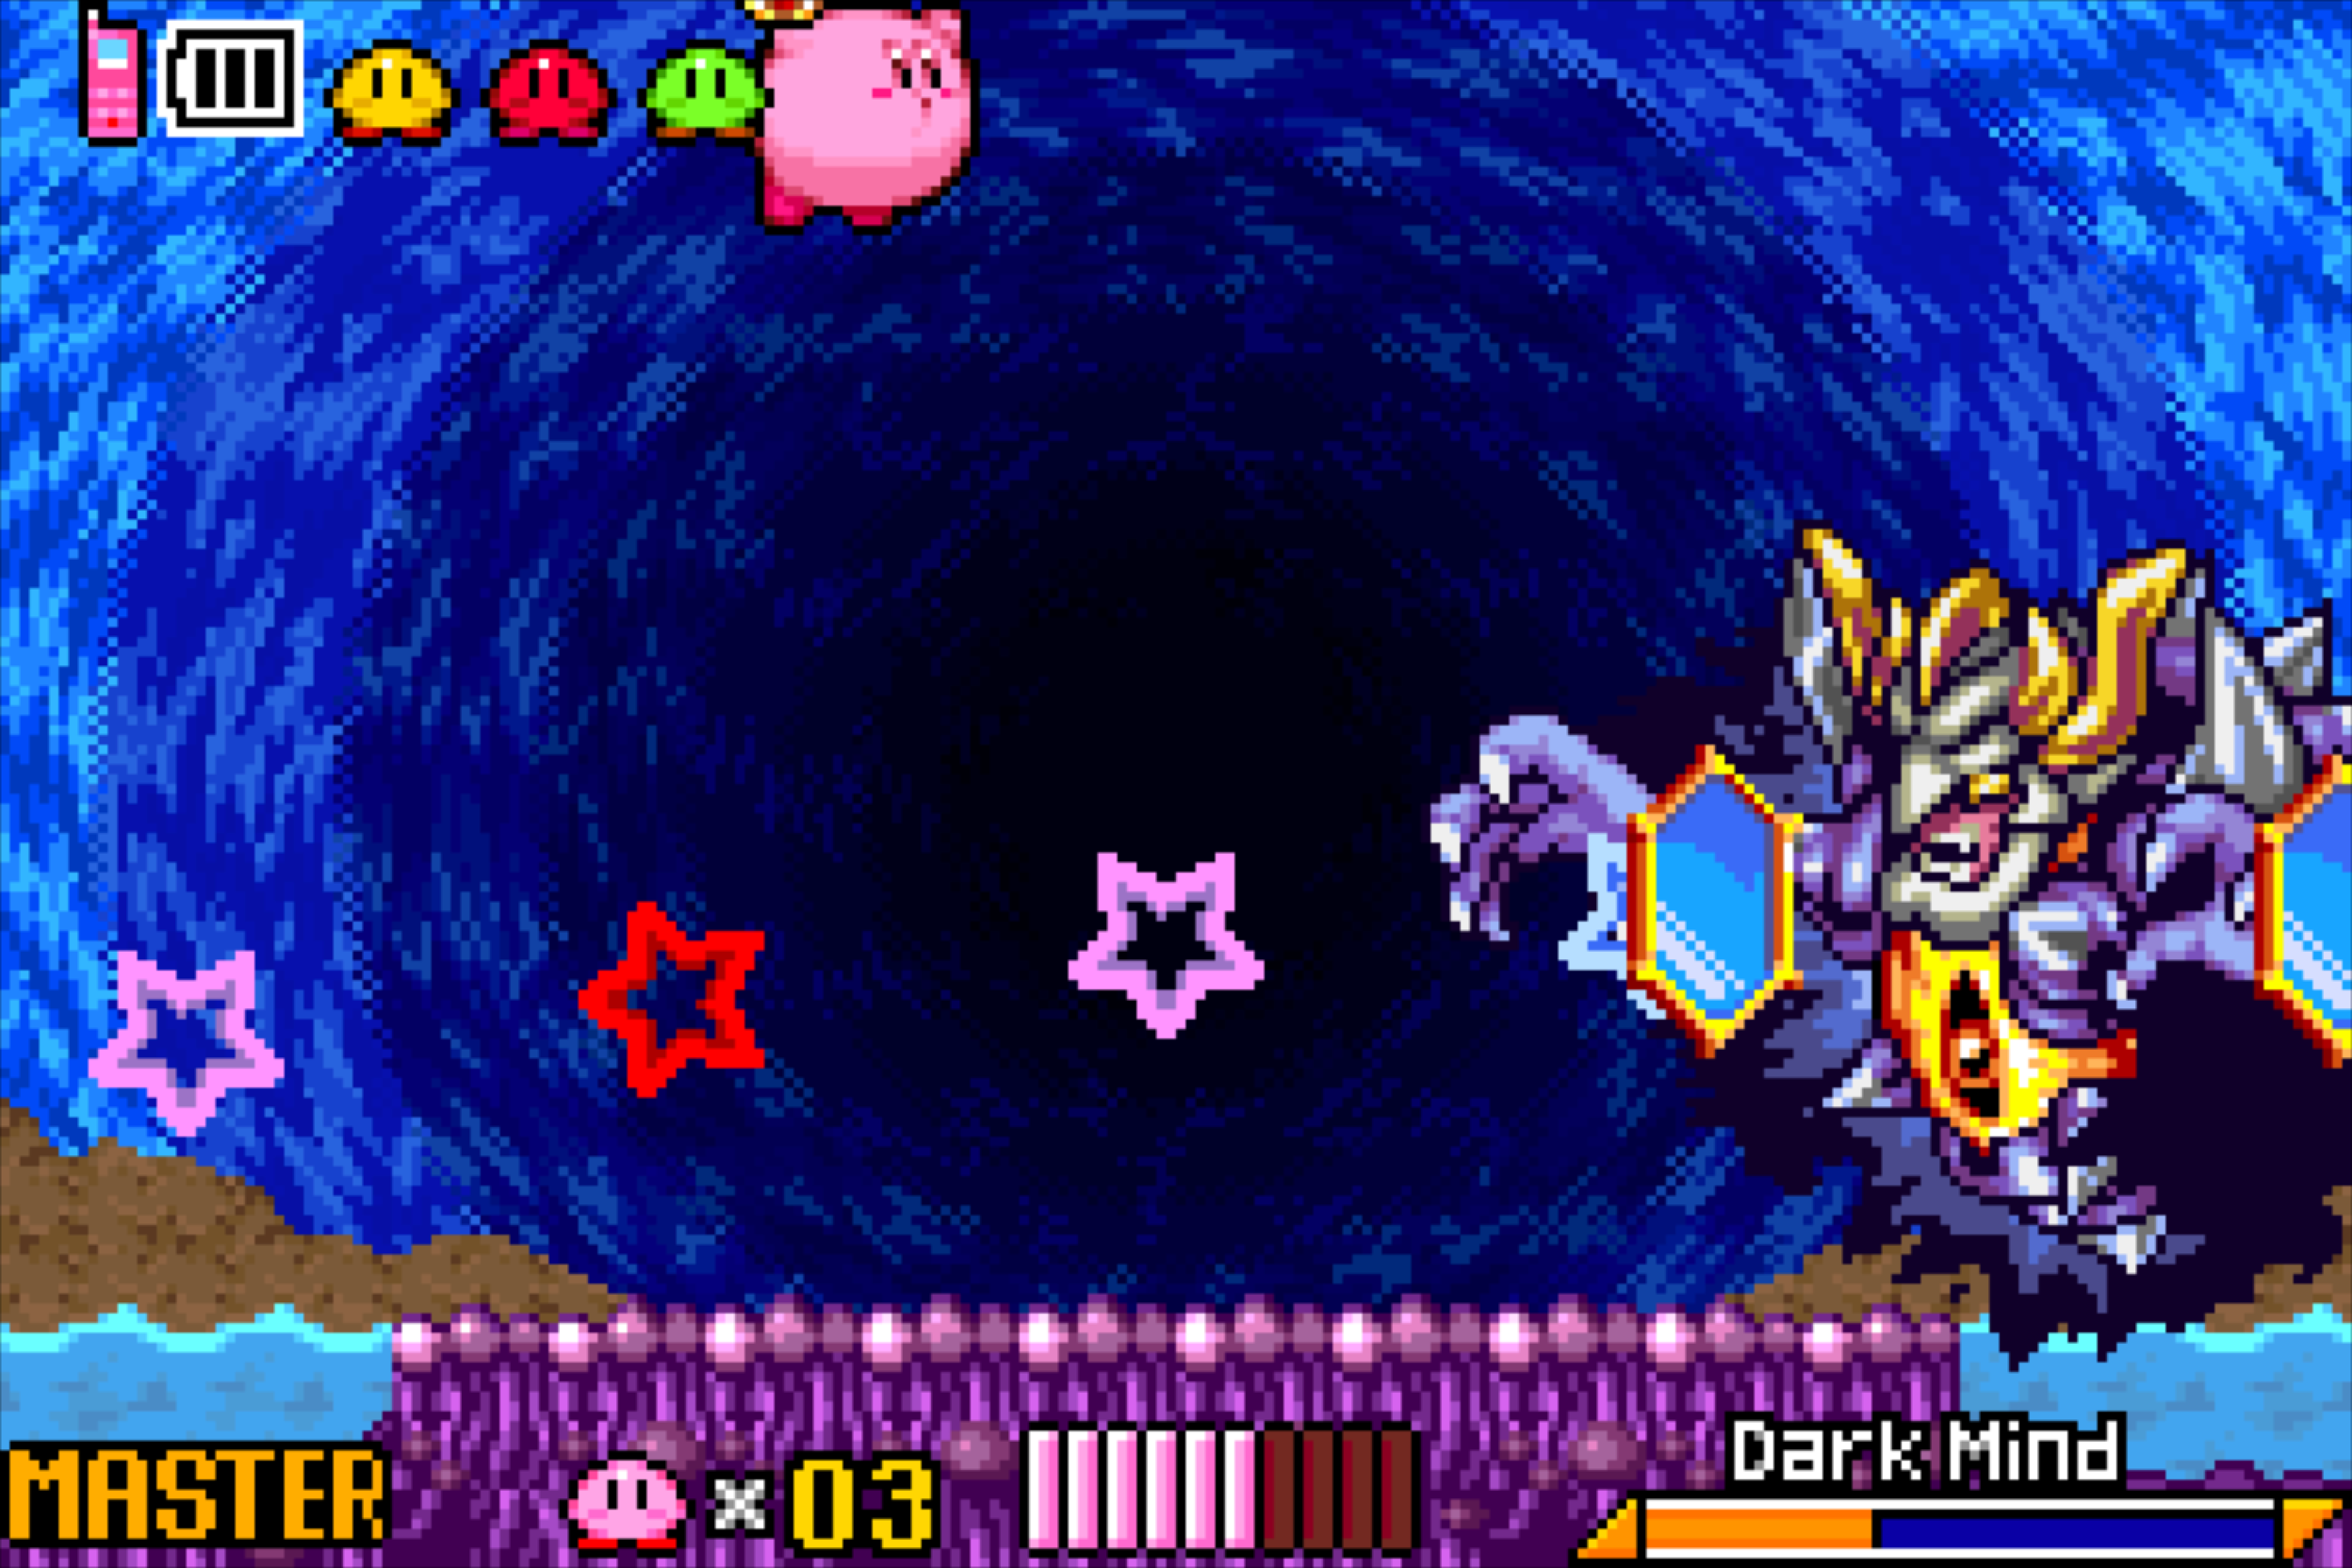 Dark Mind in Kirby and the Amazing Mirror